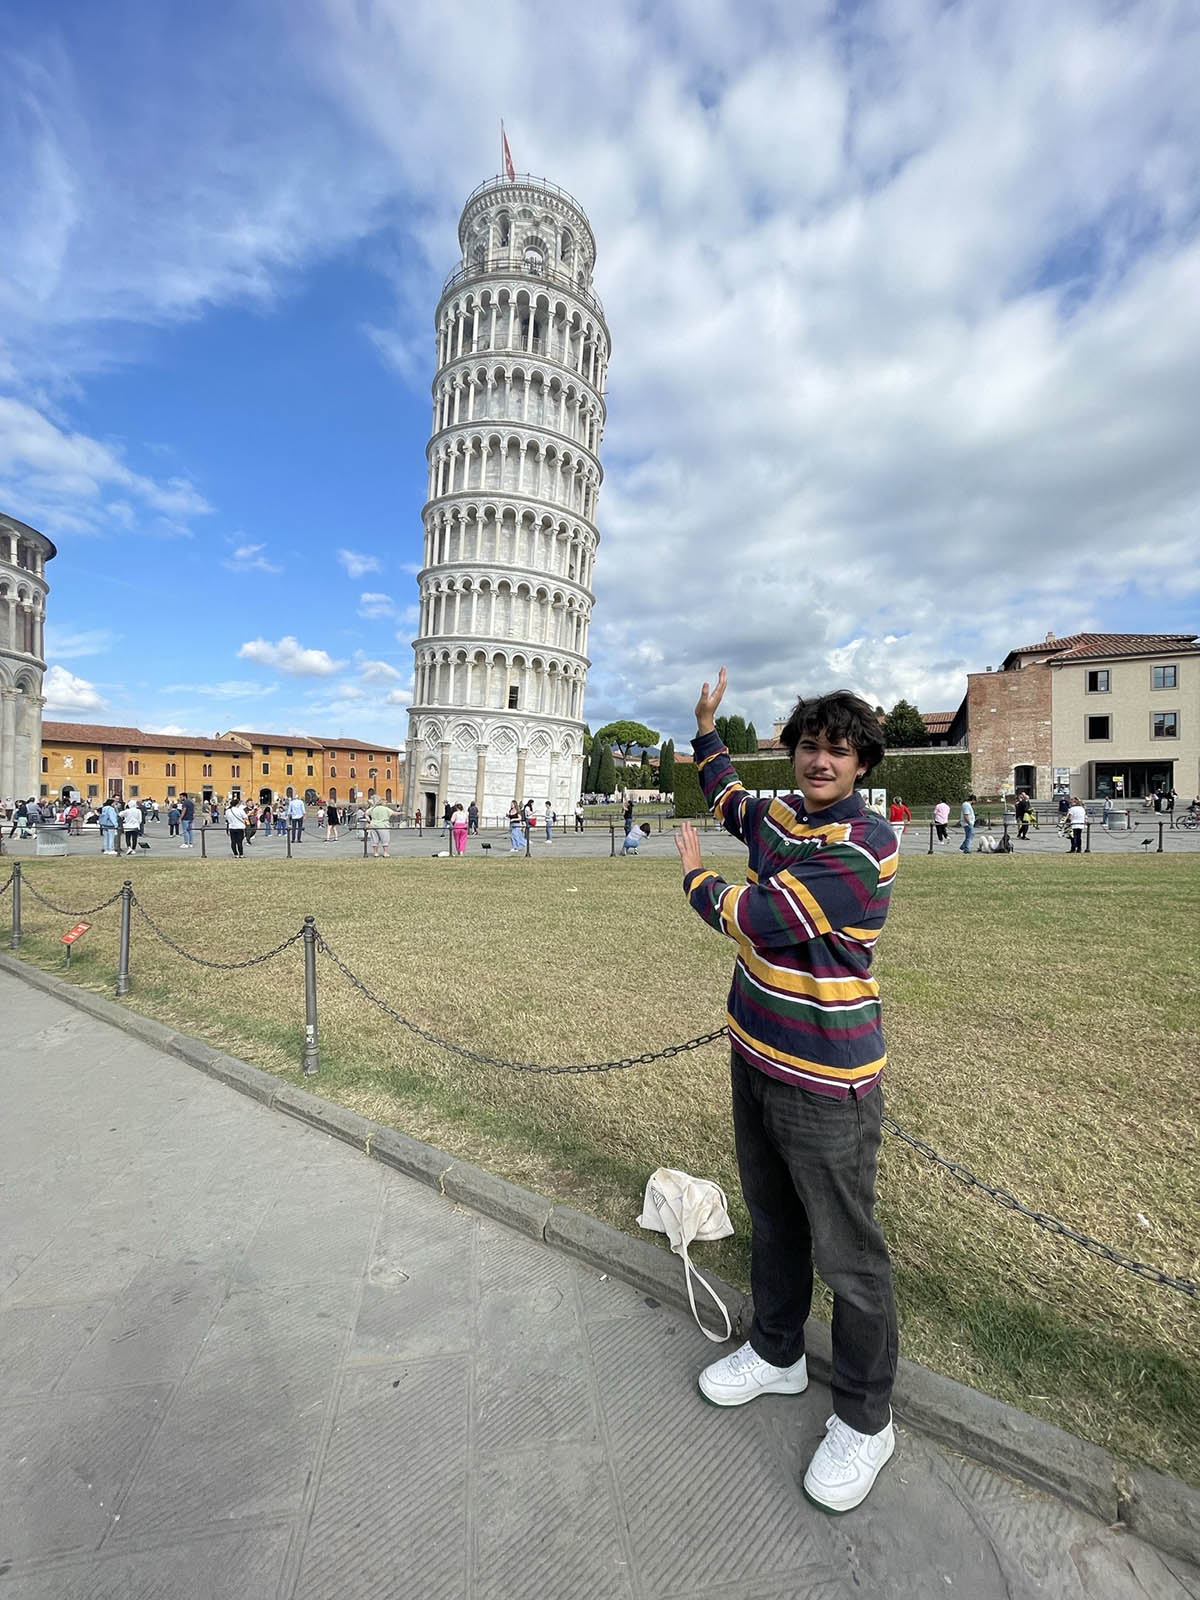 John Kabrovski ’26 visited the Leaning Tower of Pisa as part of his time in Italy.